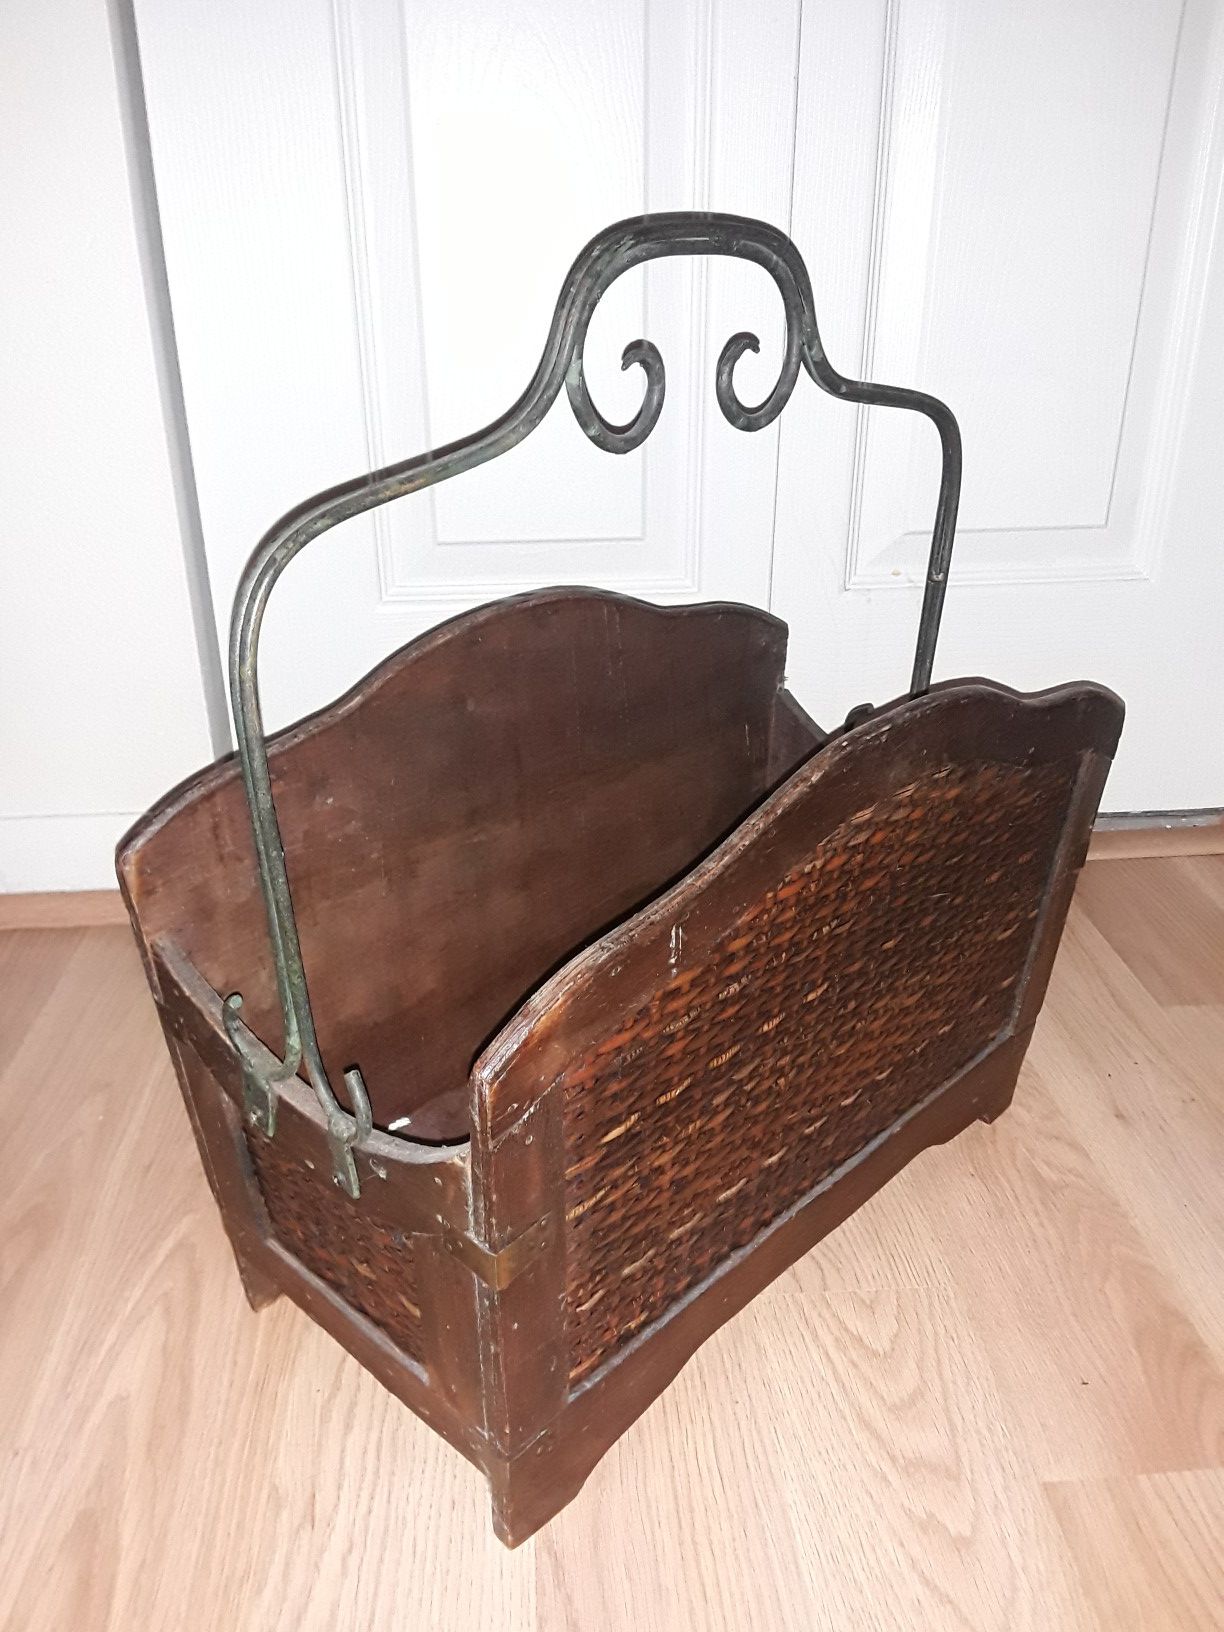 Beautiful magazine rack in great condition!